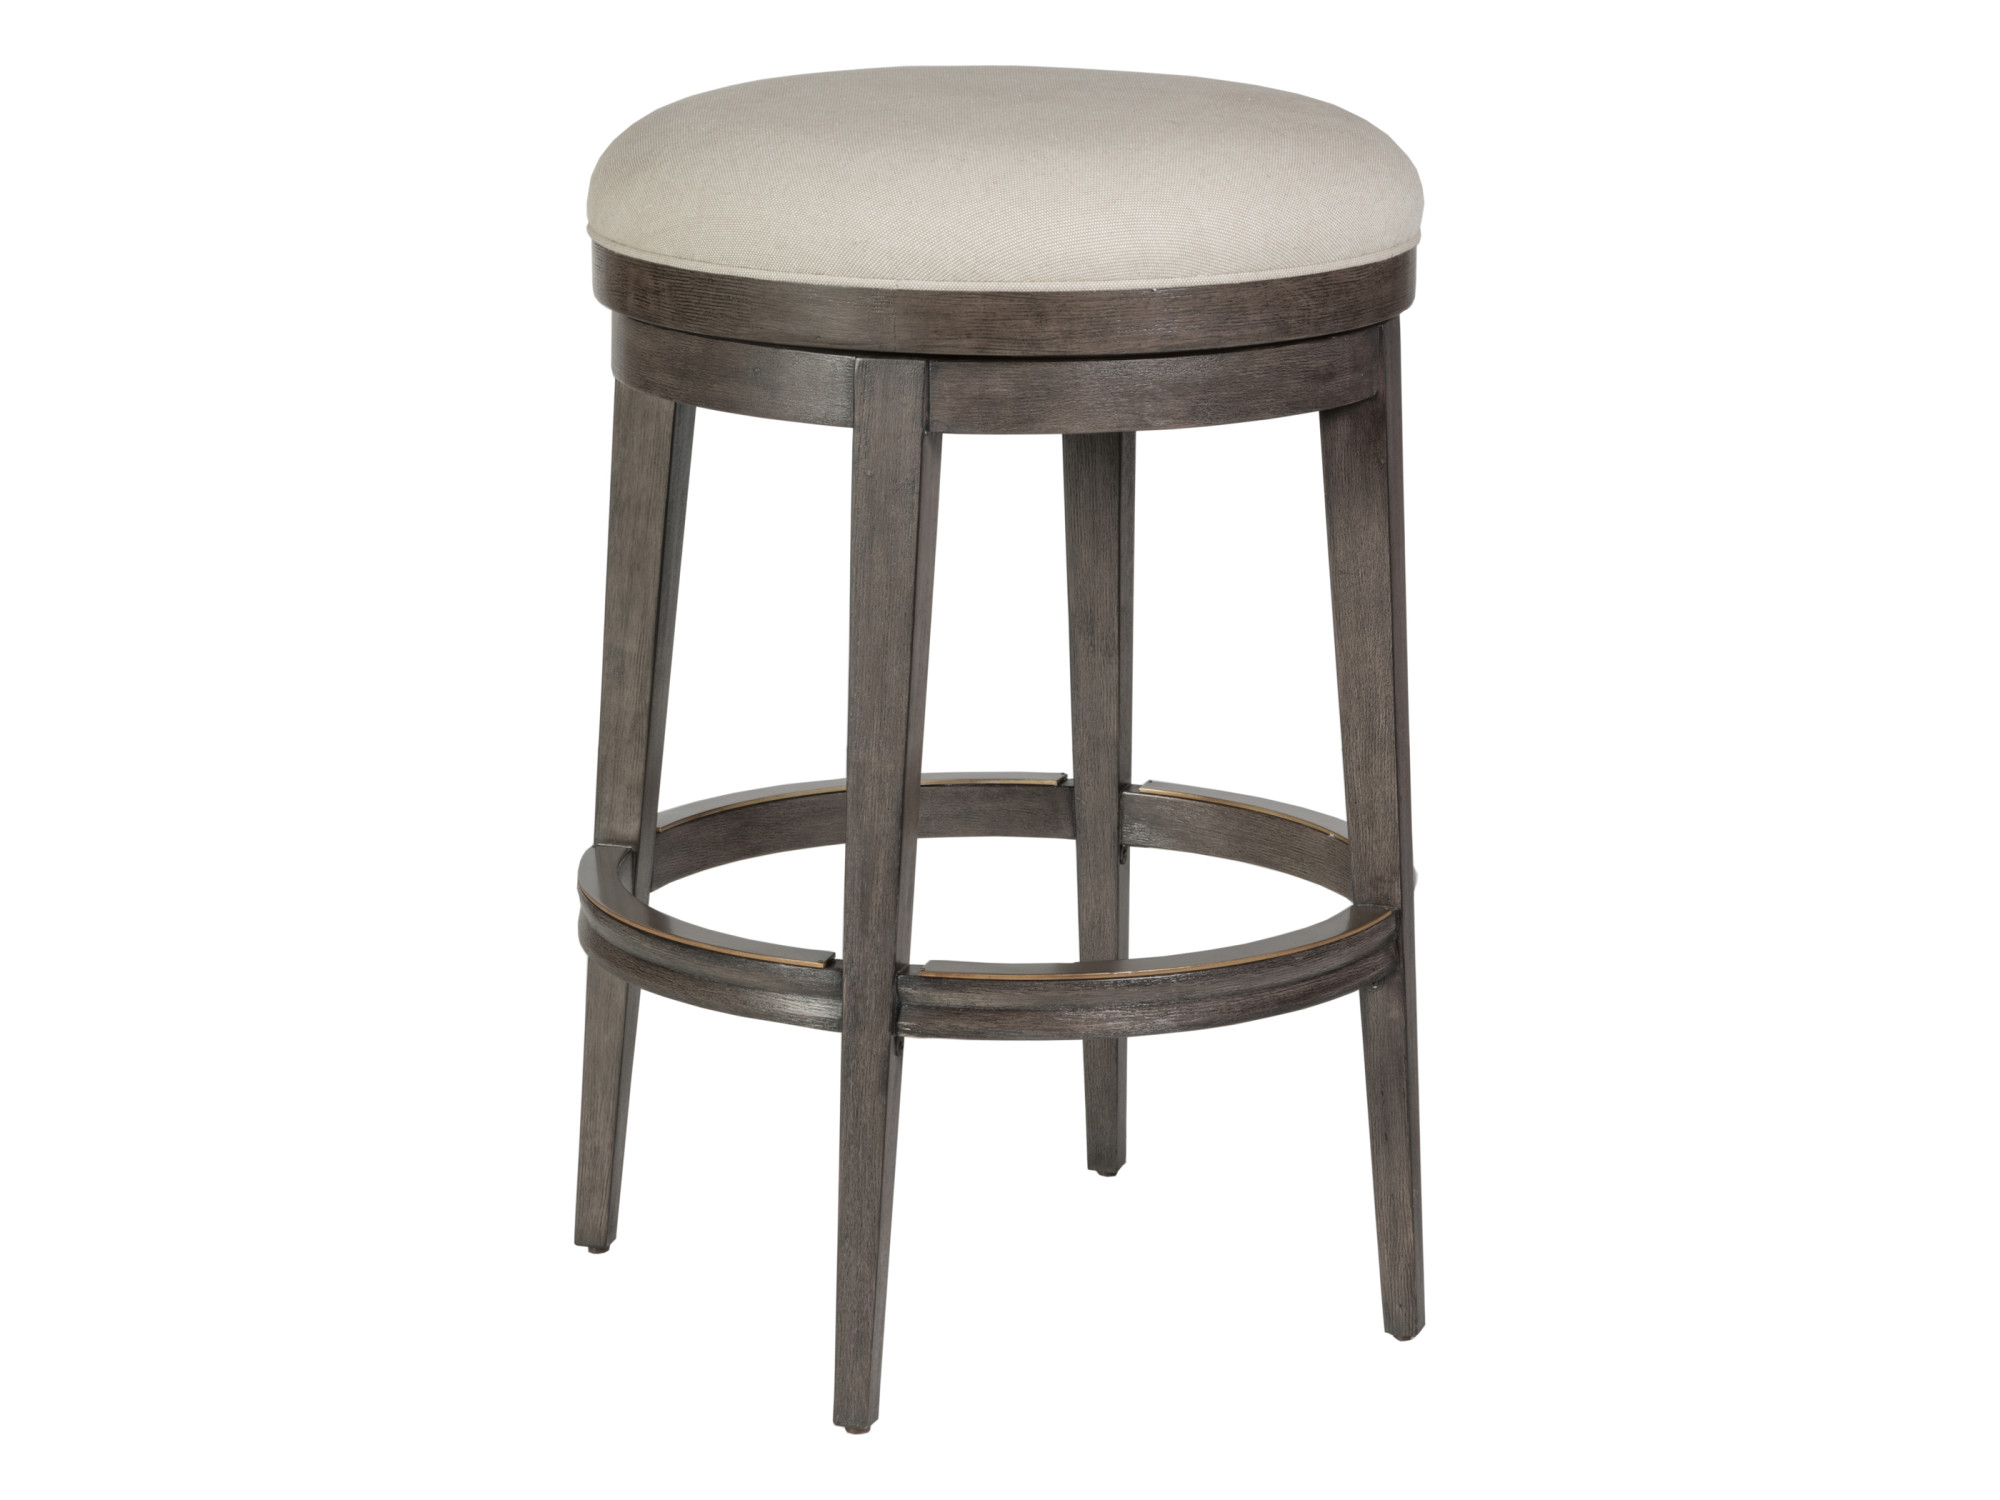 backless swivel bar stools for kitchen island